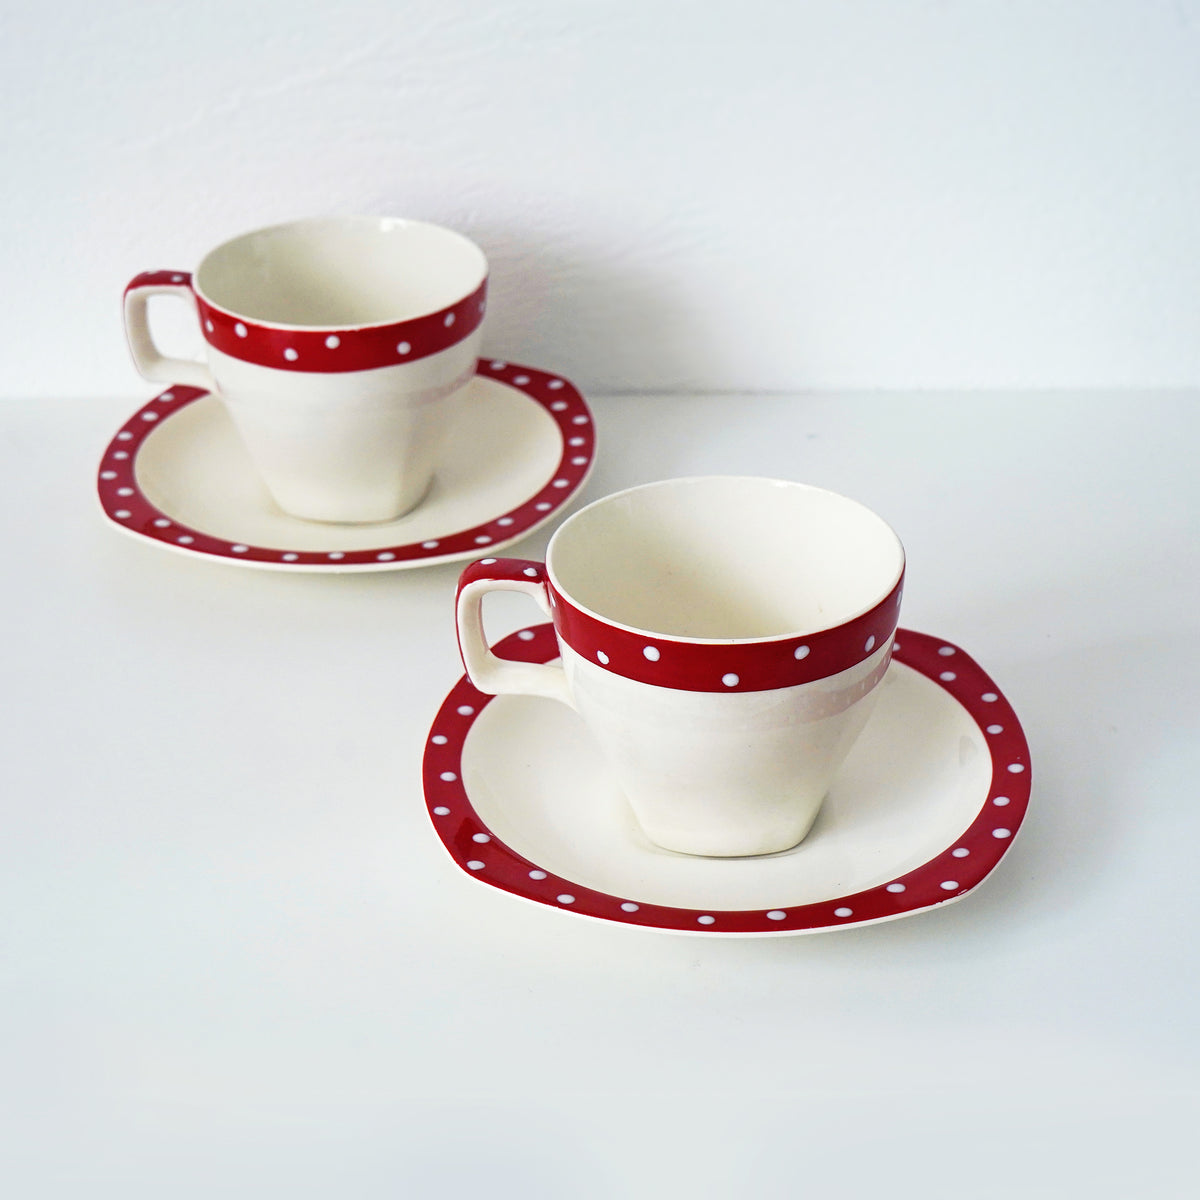 1960s Midwinter Cup & Saucer / 英国 ミッドウィンター カップ＆ソーサー (dot)